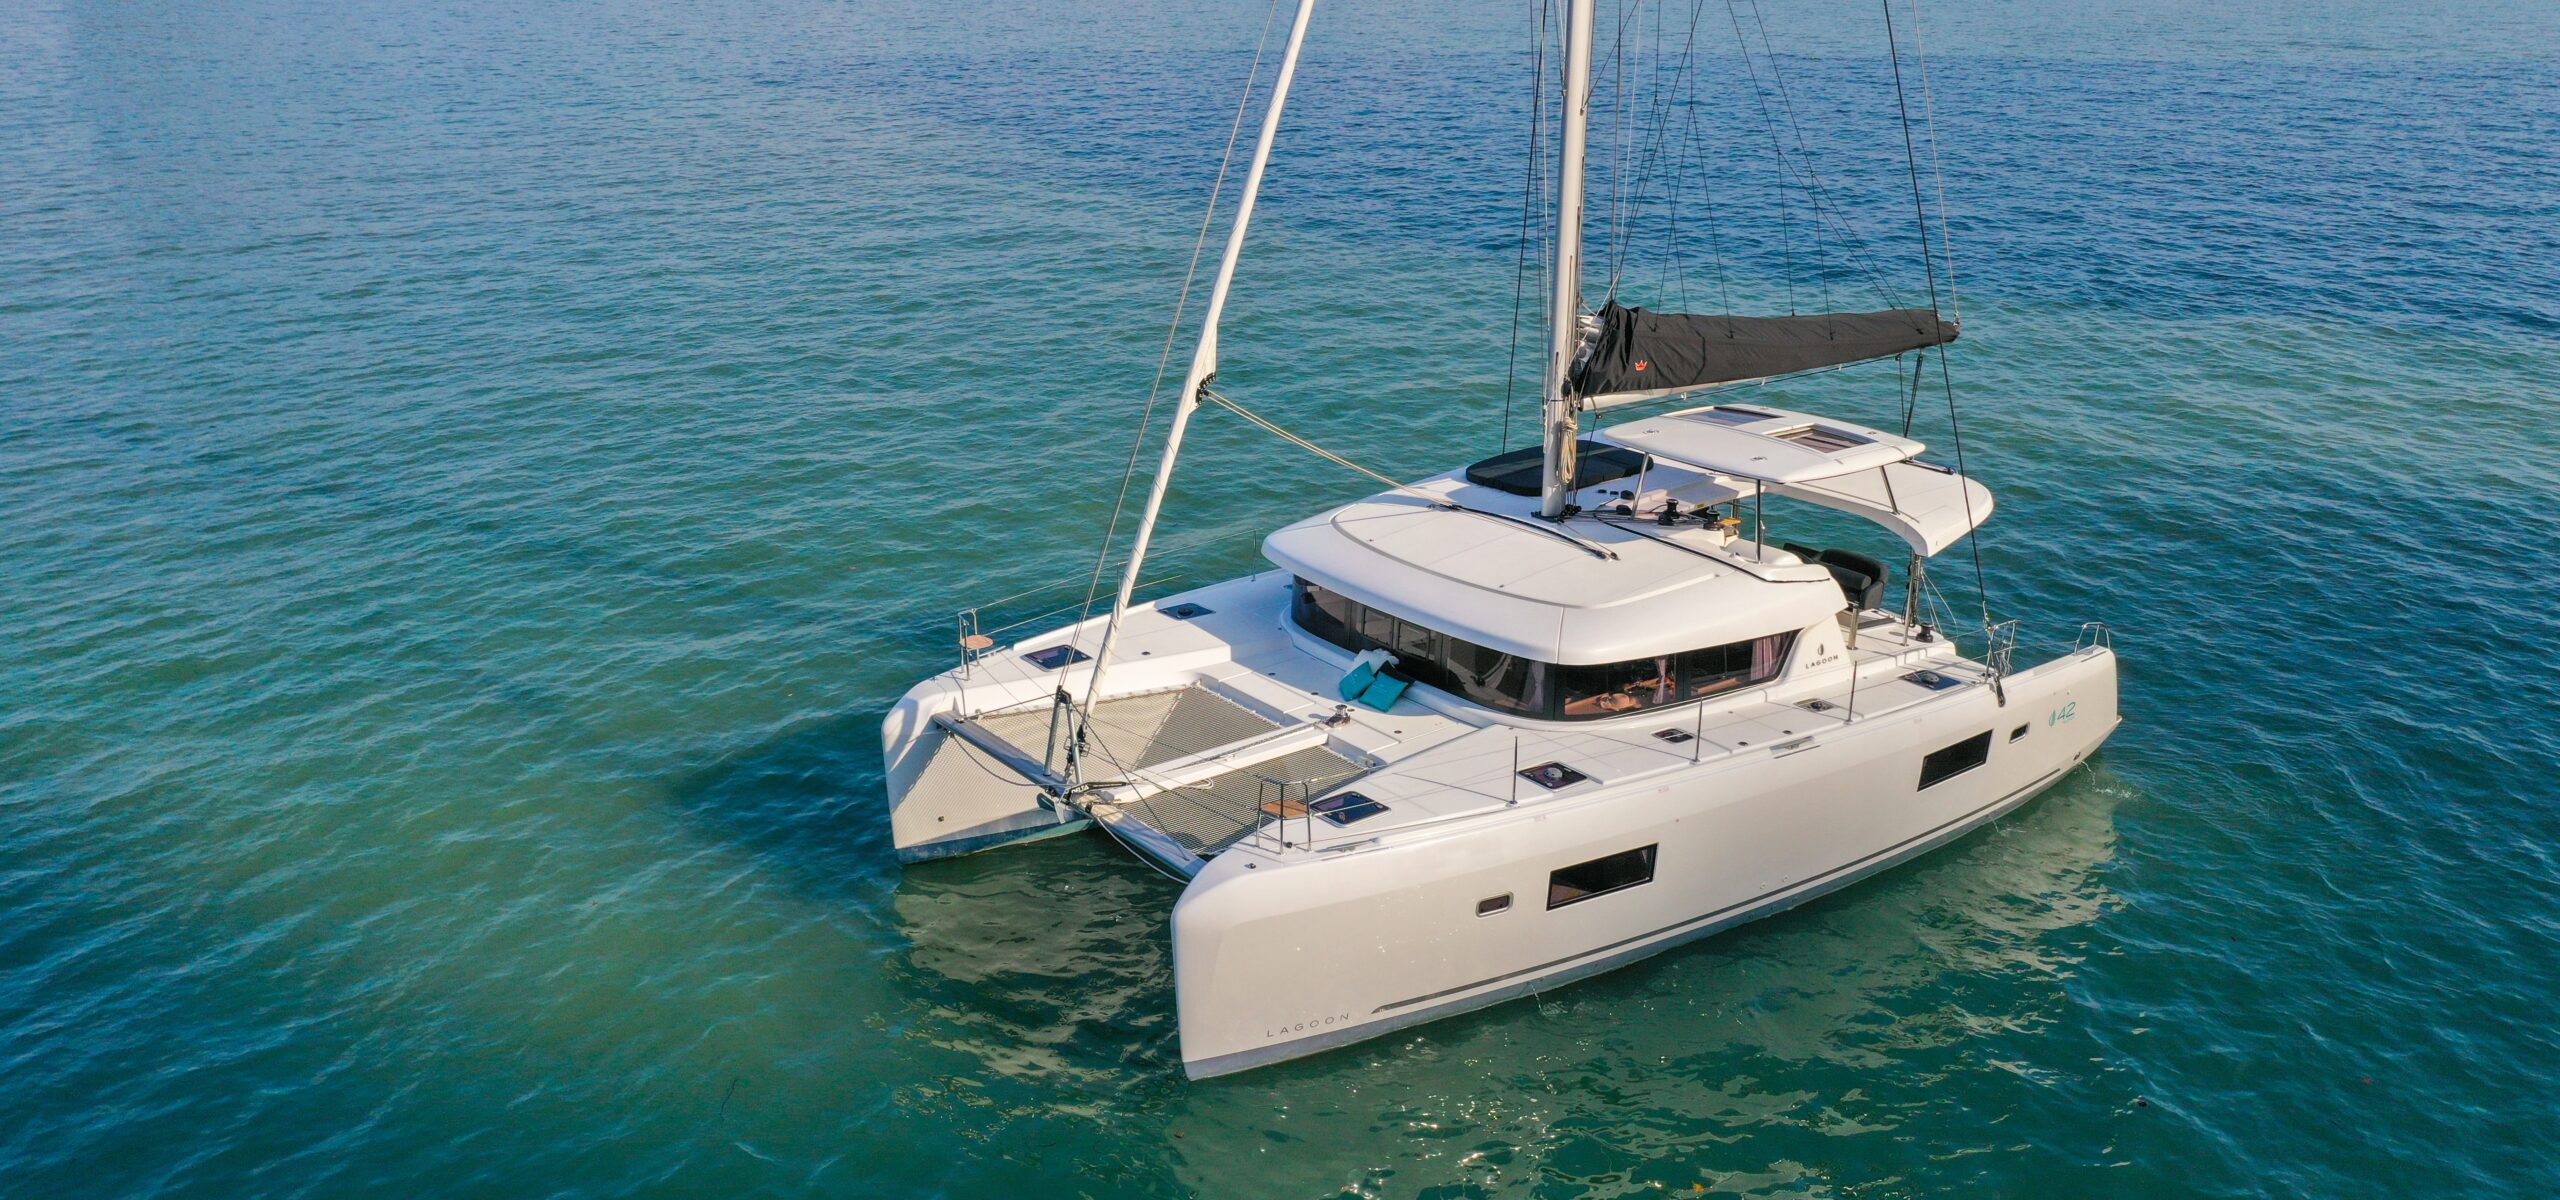 Lagoon’s Bestseller Gets Major Upgrades with the launch of the Lagoon 42 Millennium